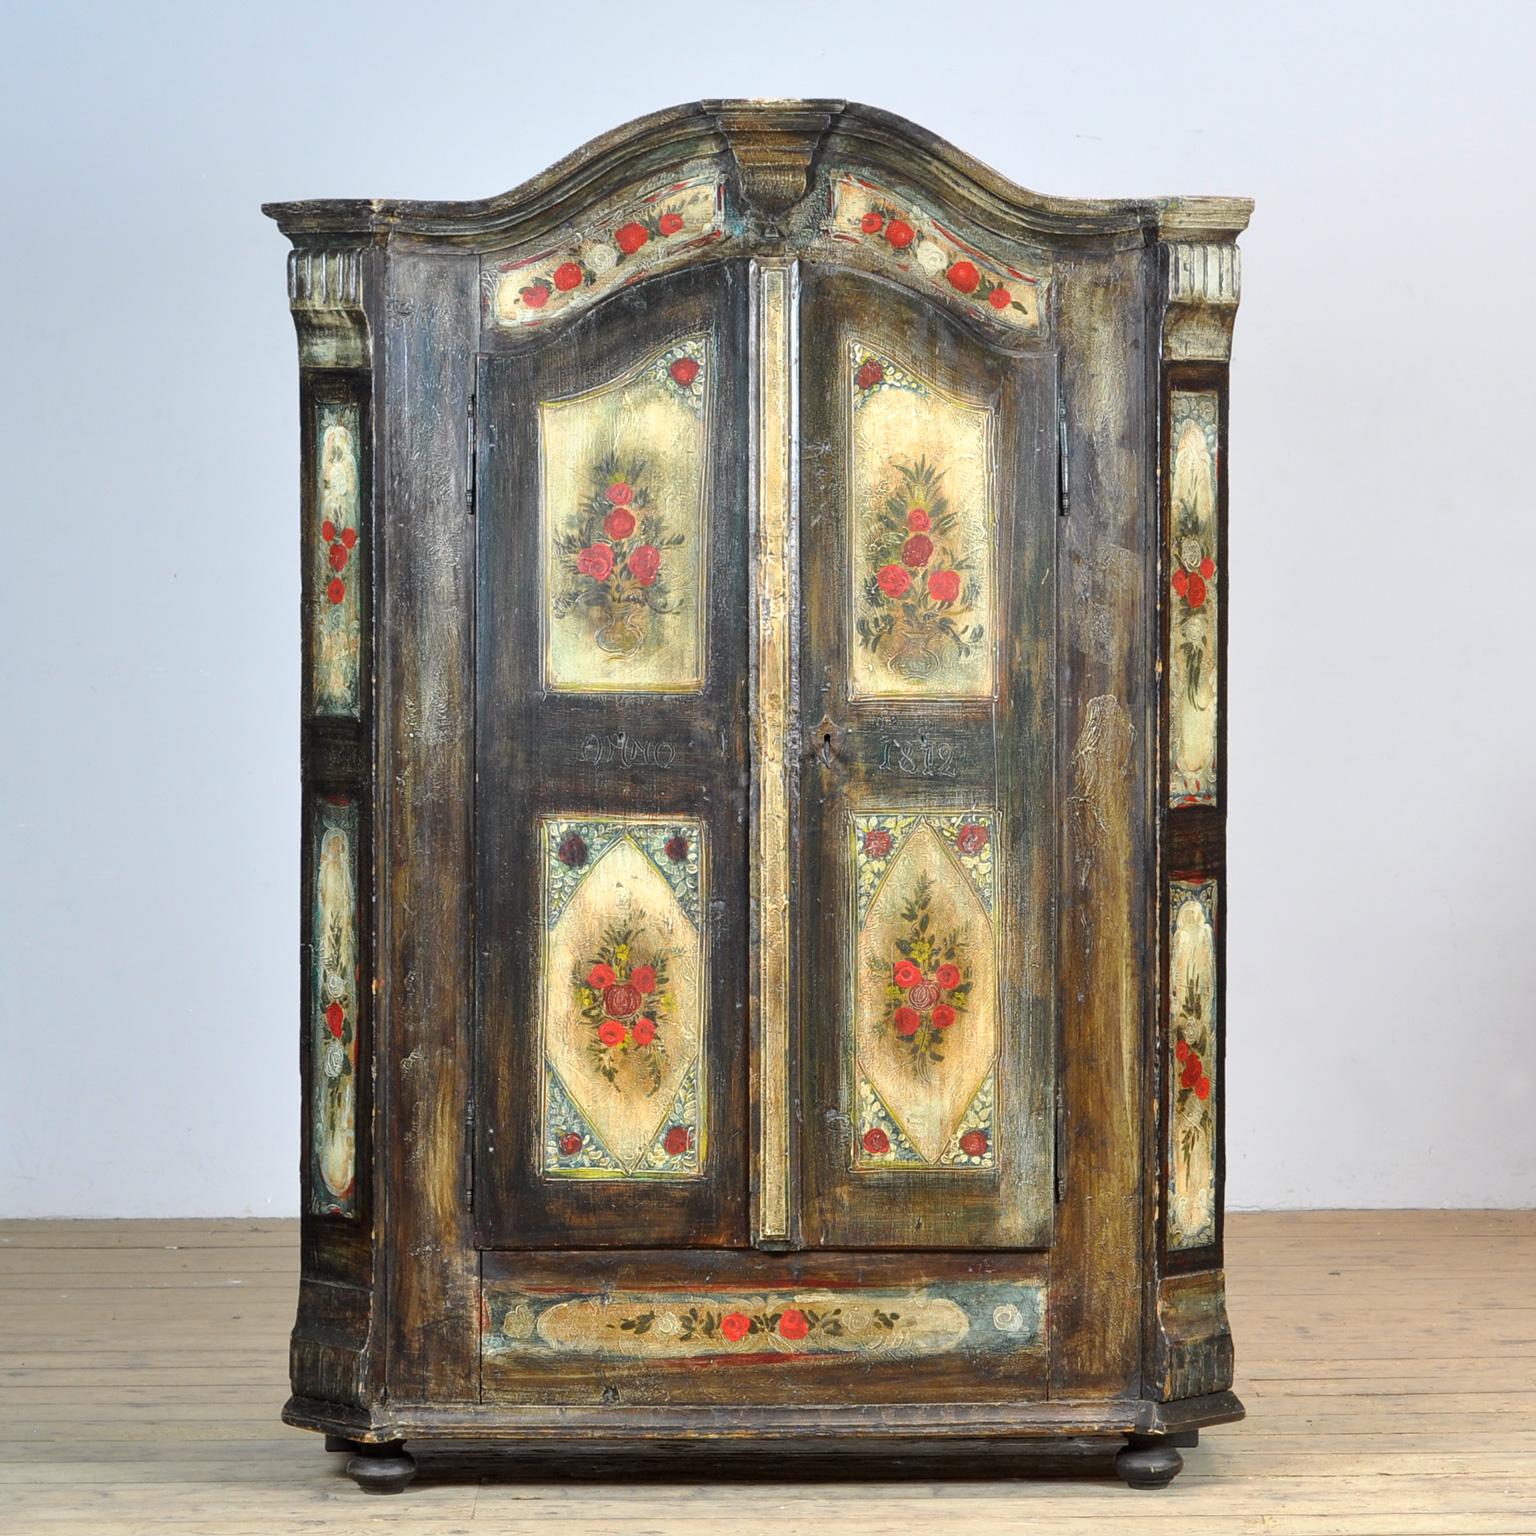 A beautiful cabinet from the rural south of germany, dating from 1812. The cabinet was probably given as a wedding present. This cabinet is made of solid pine and is hand painted in vibrant colors. The cabinet has kept its original hinges and lock.